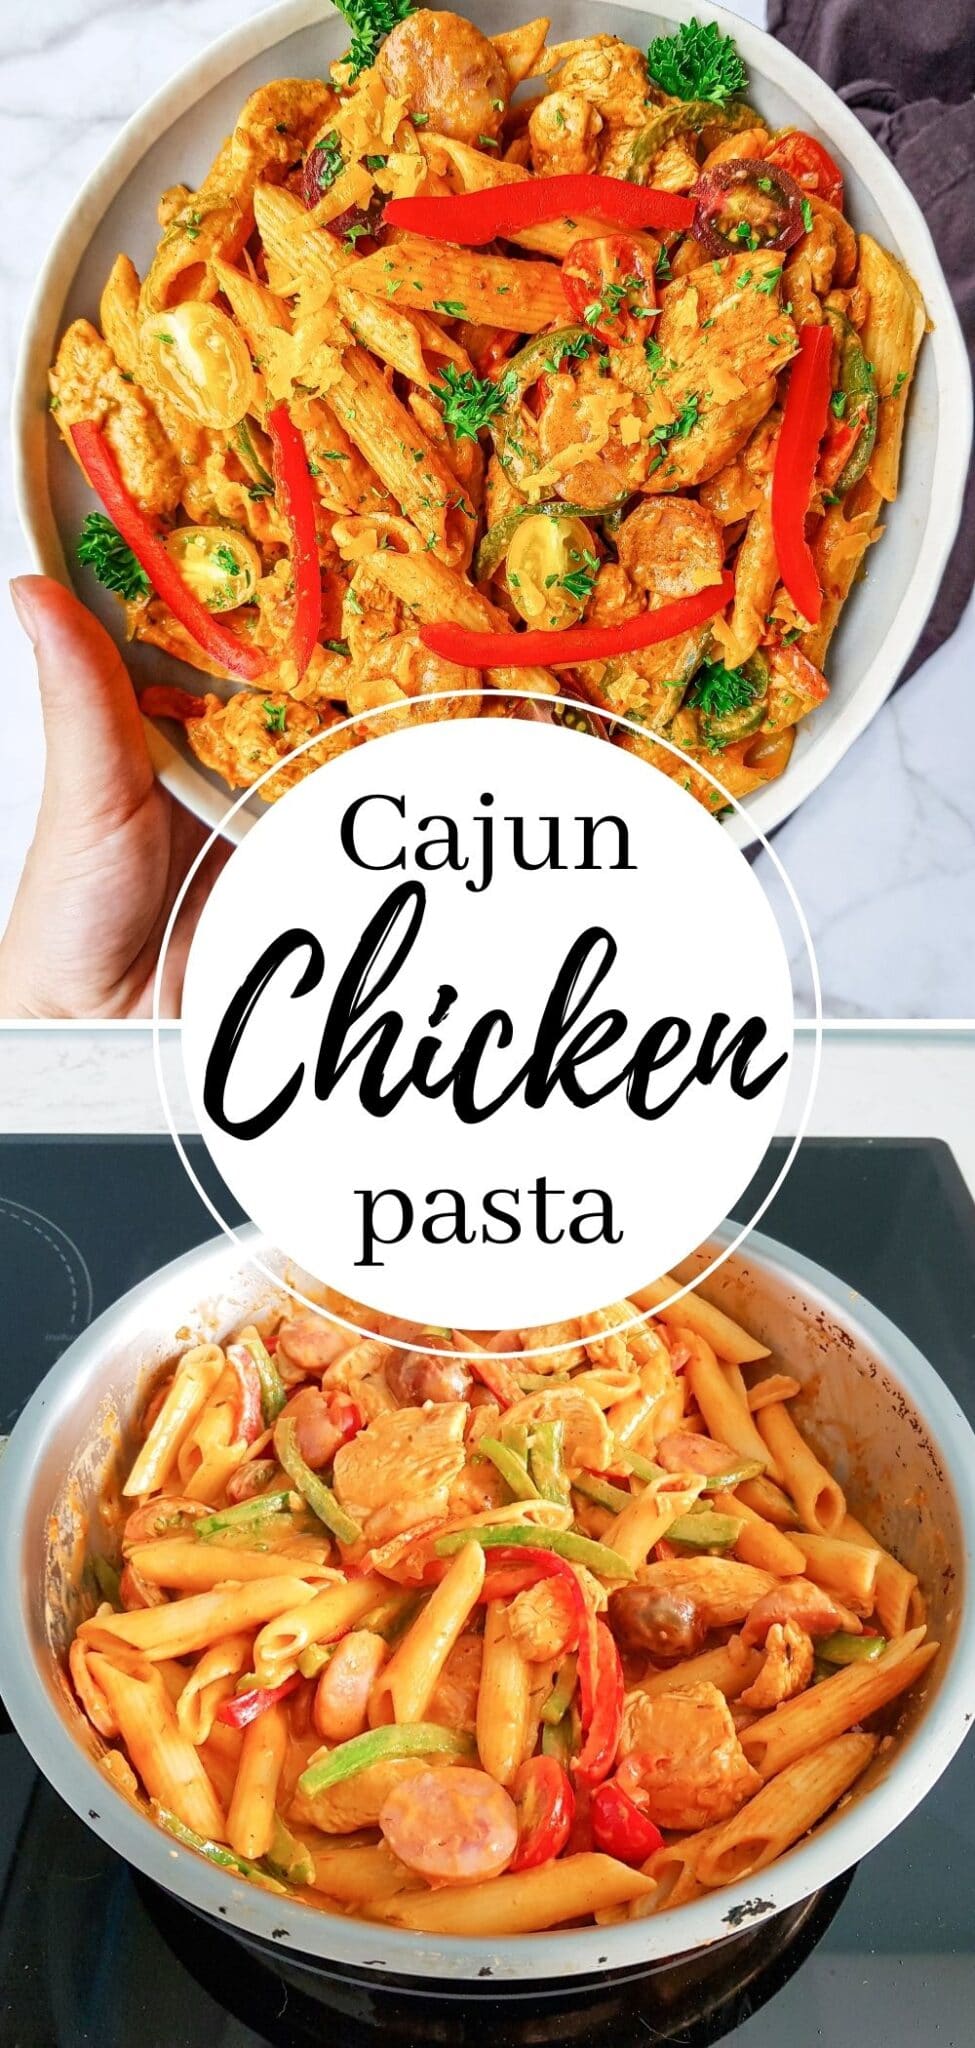 This Spicy Chicken Pasta is a flavorful, one-pan meal you can whip up in under half an hour. Perfect for busy weeknights! #cajun #chicken #pasta #onepotmeal #spicychickenpasta via @wondermomwannab